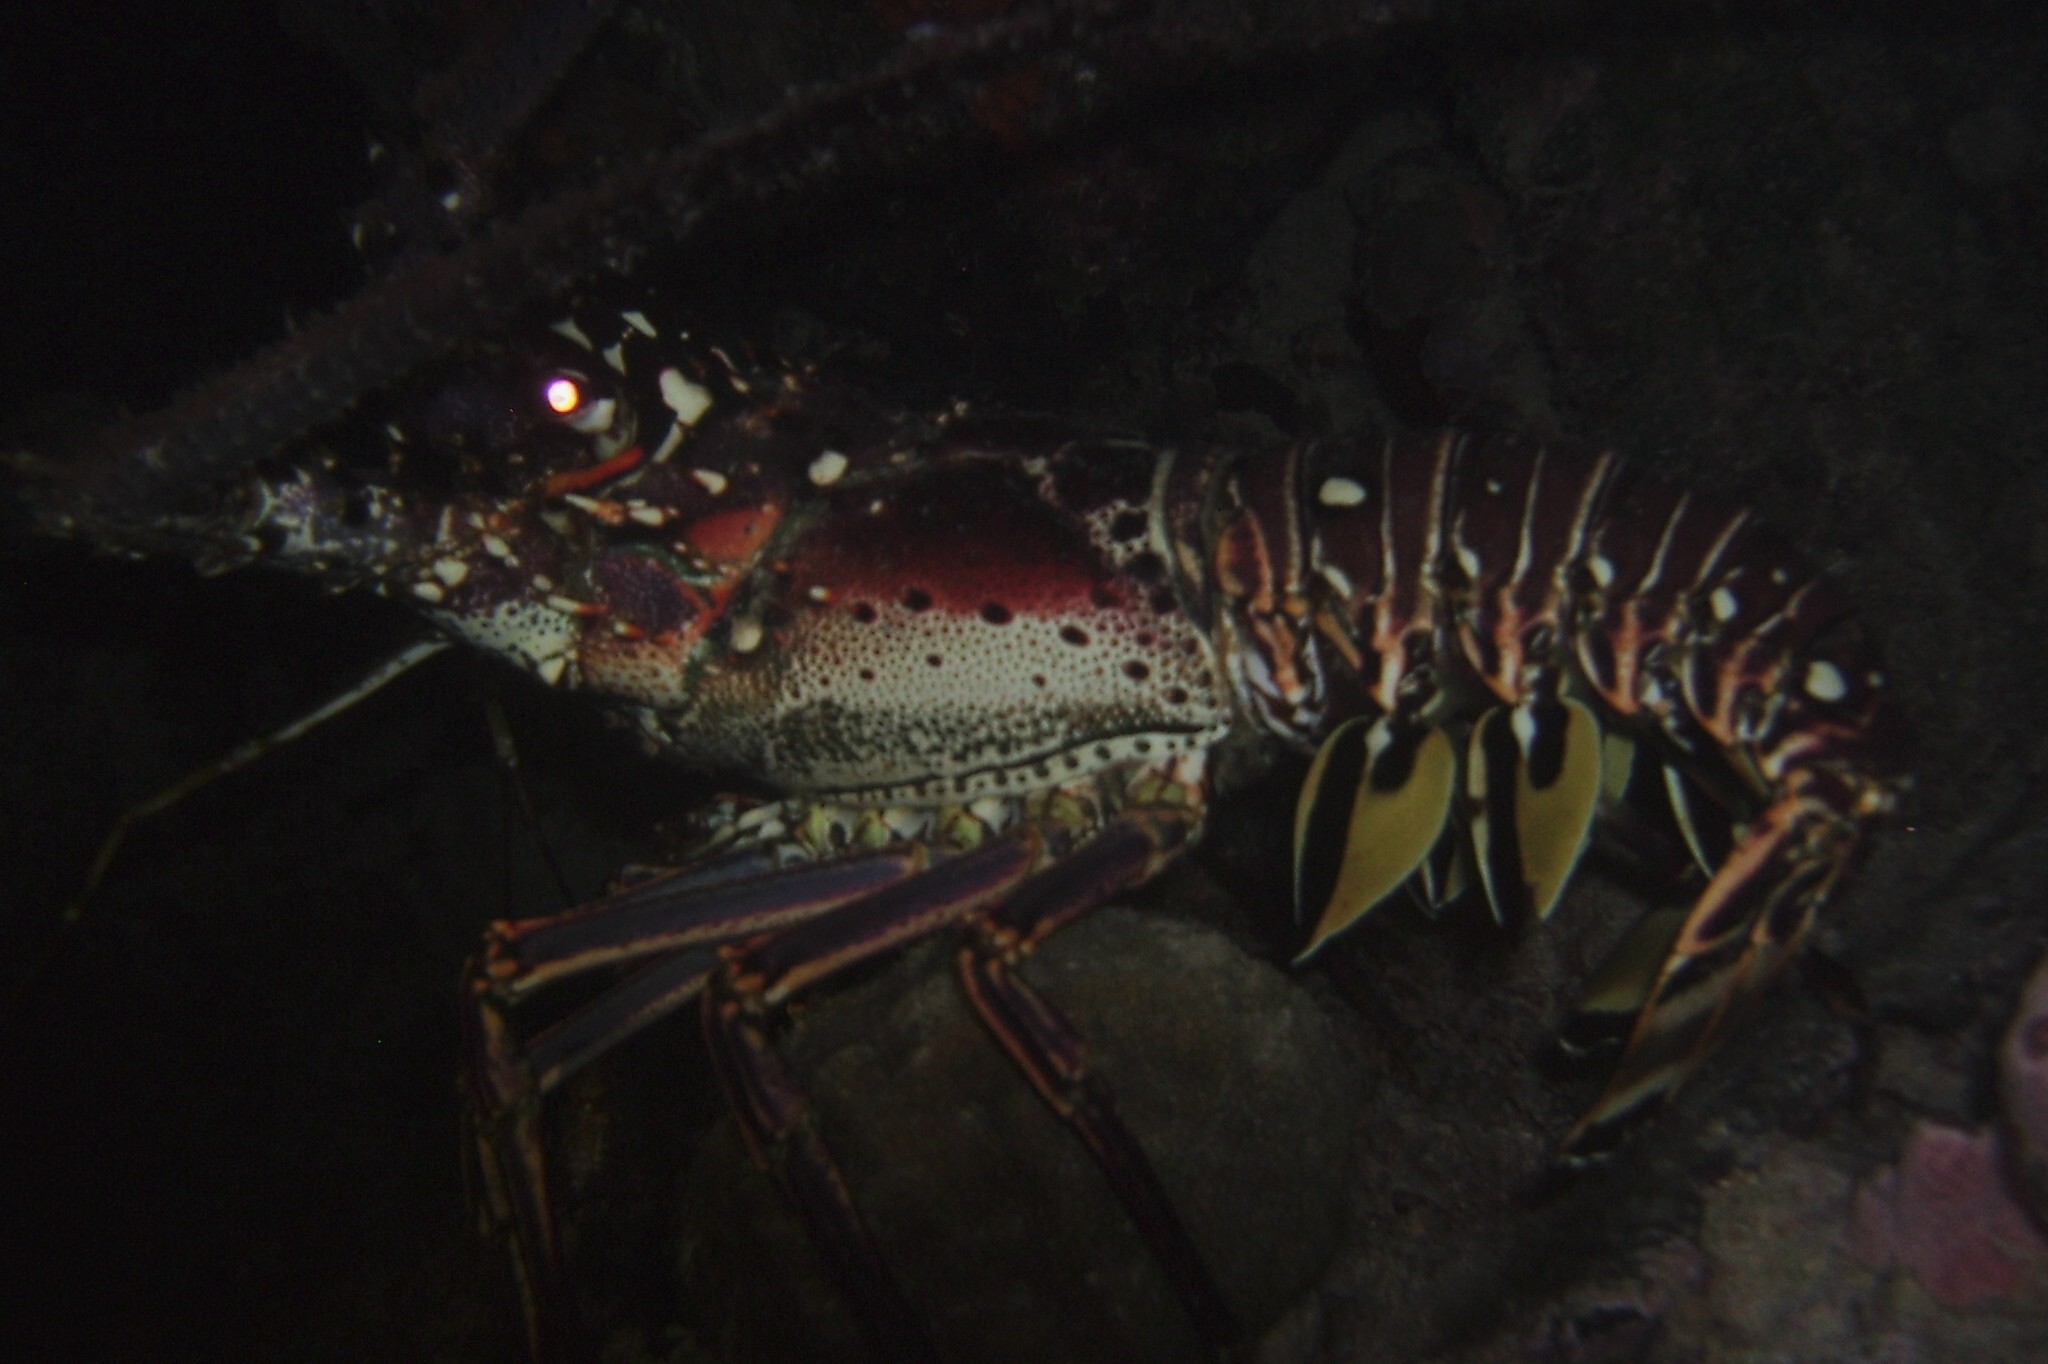 Lobster on night dive